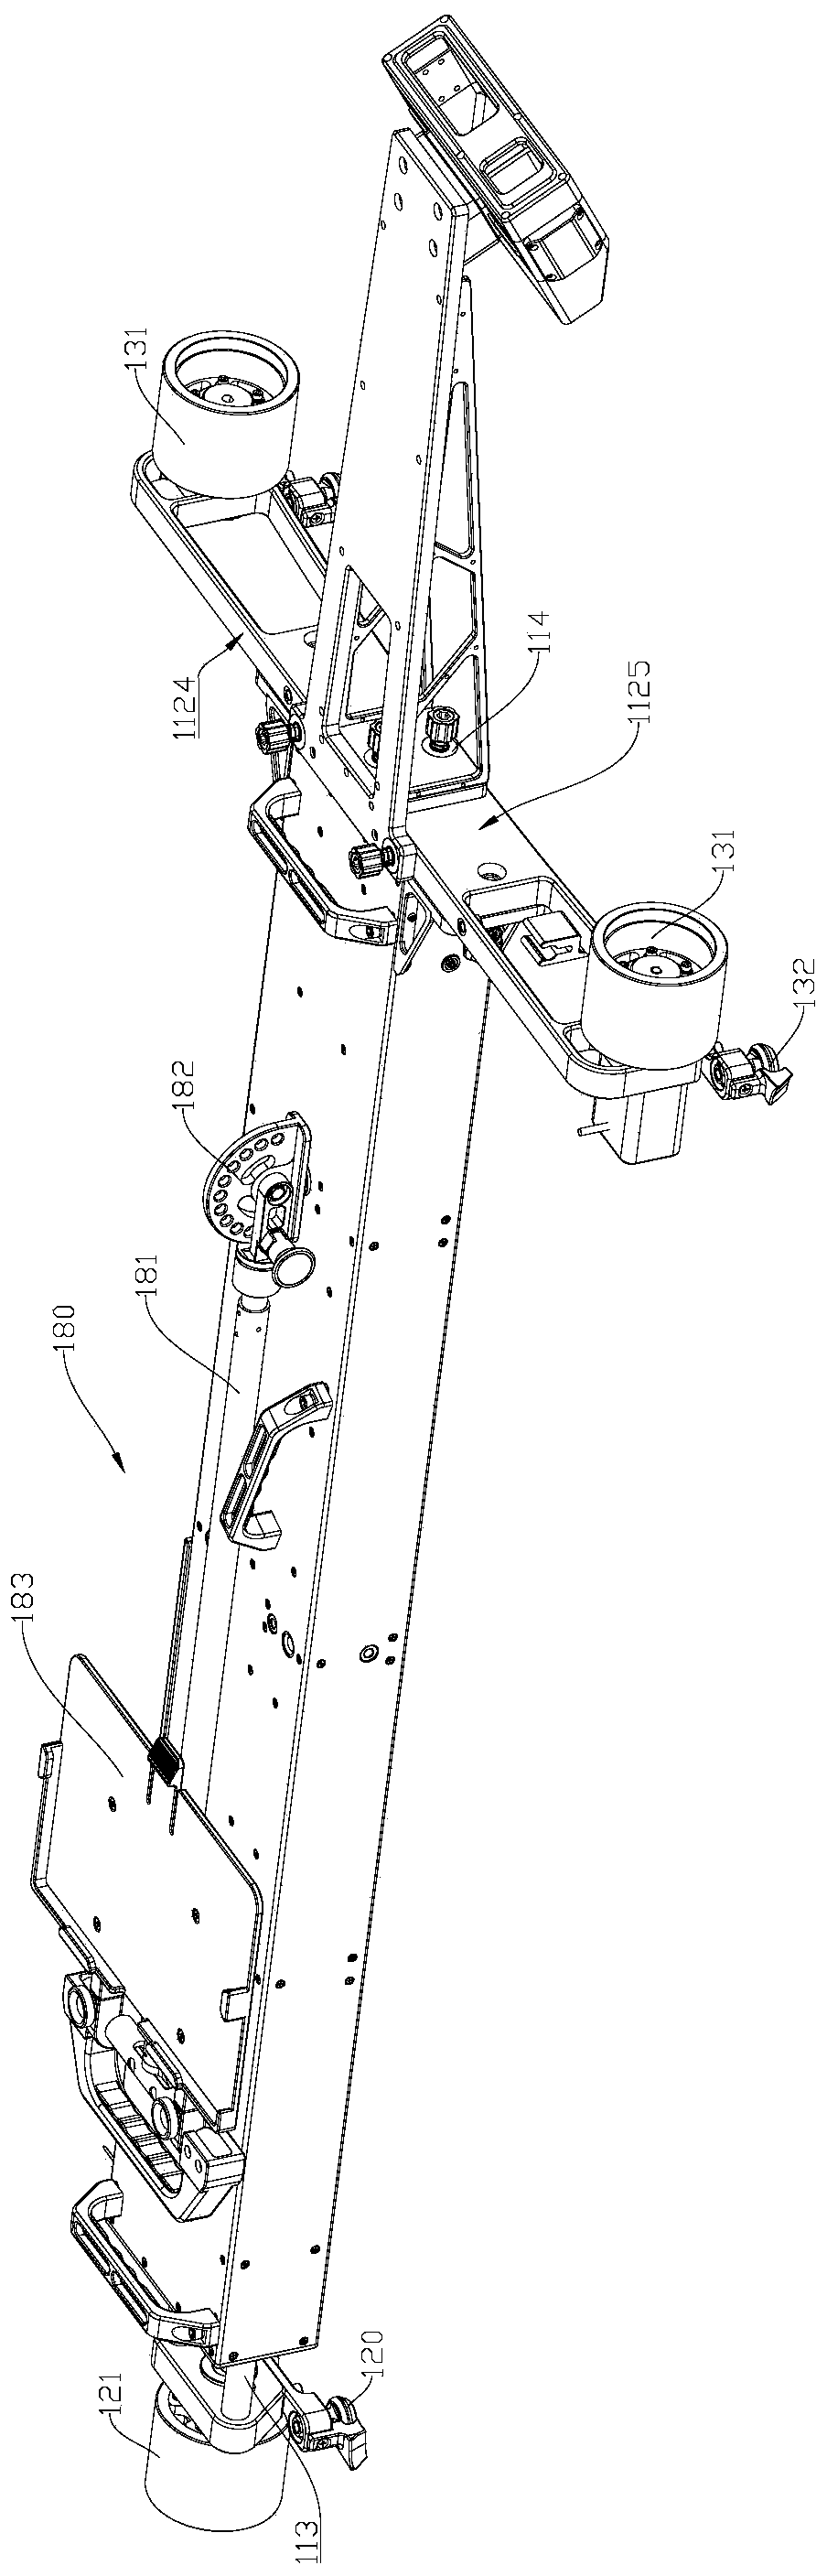 Third rail abrasion detection device and method